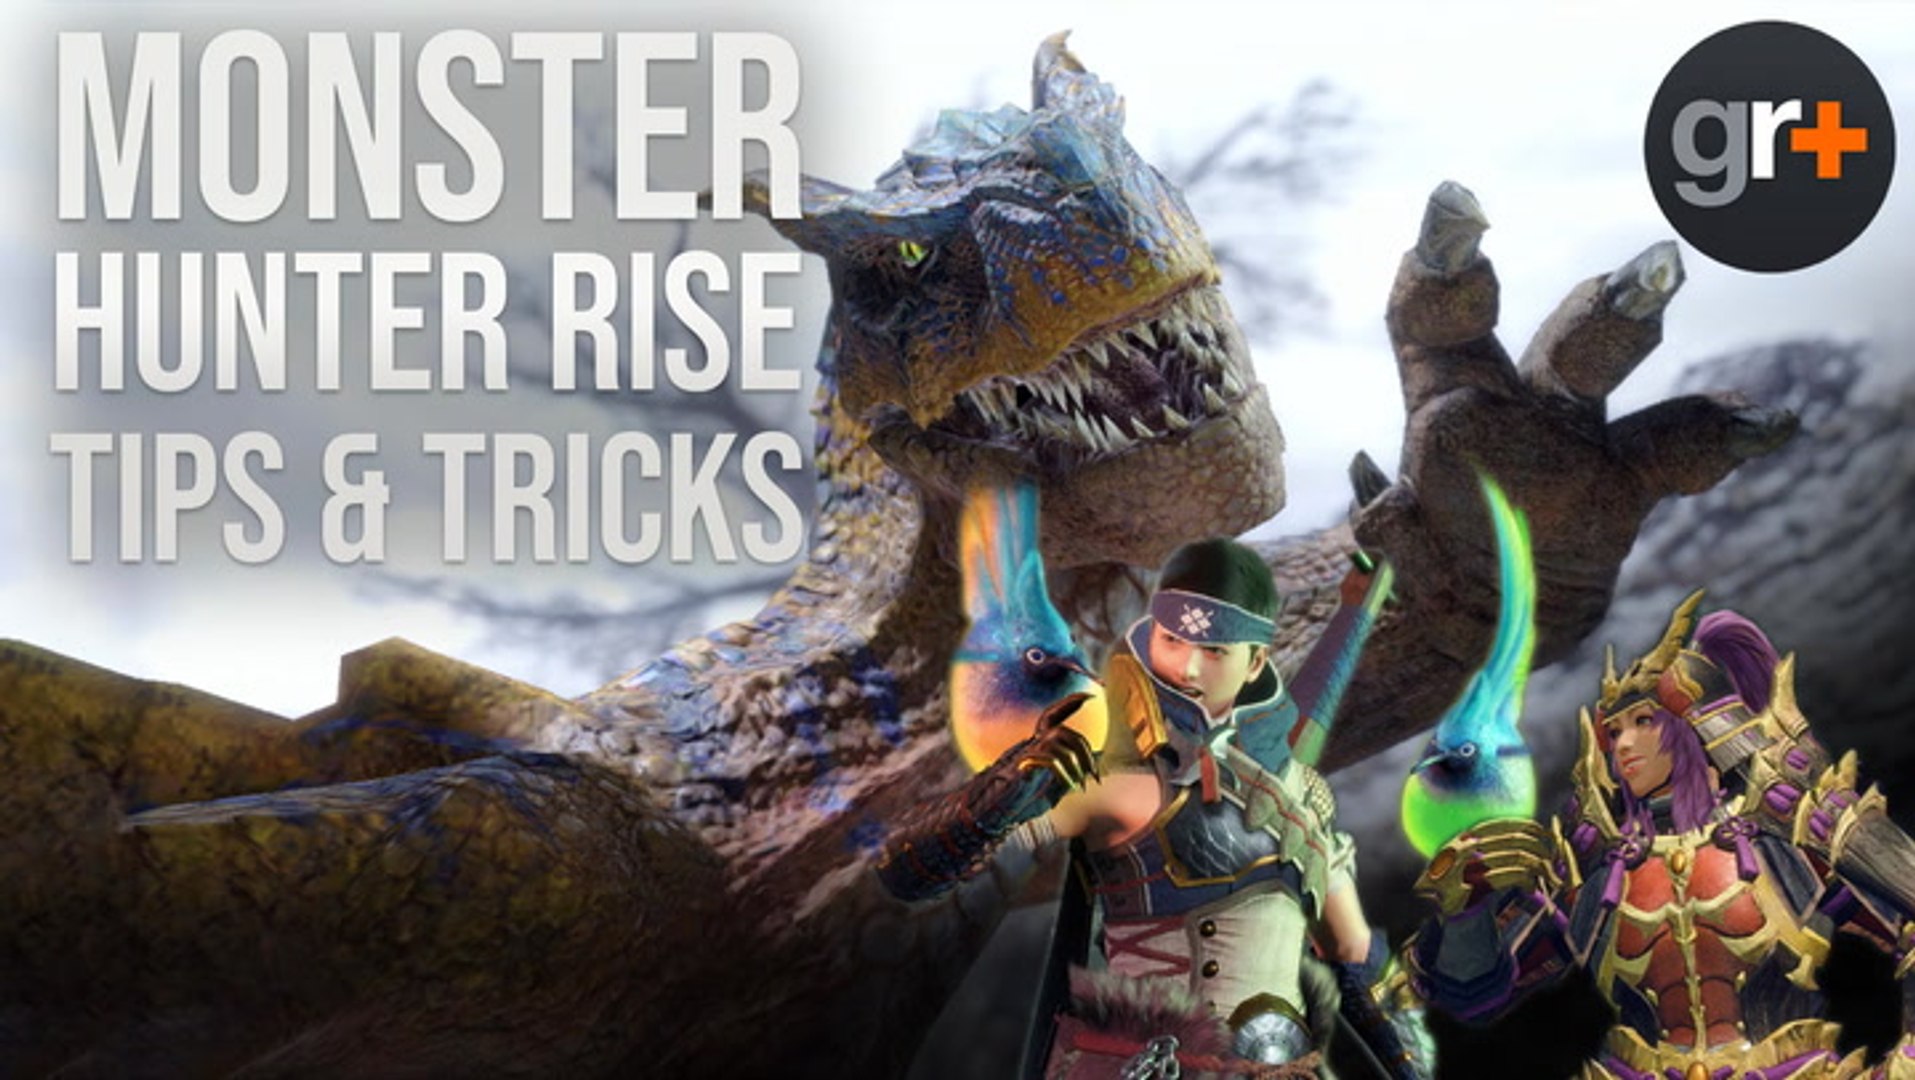 Monster Hunter Rise PC hands-on: First impressions on the PC version